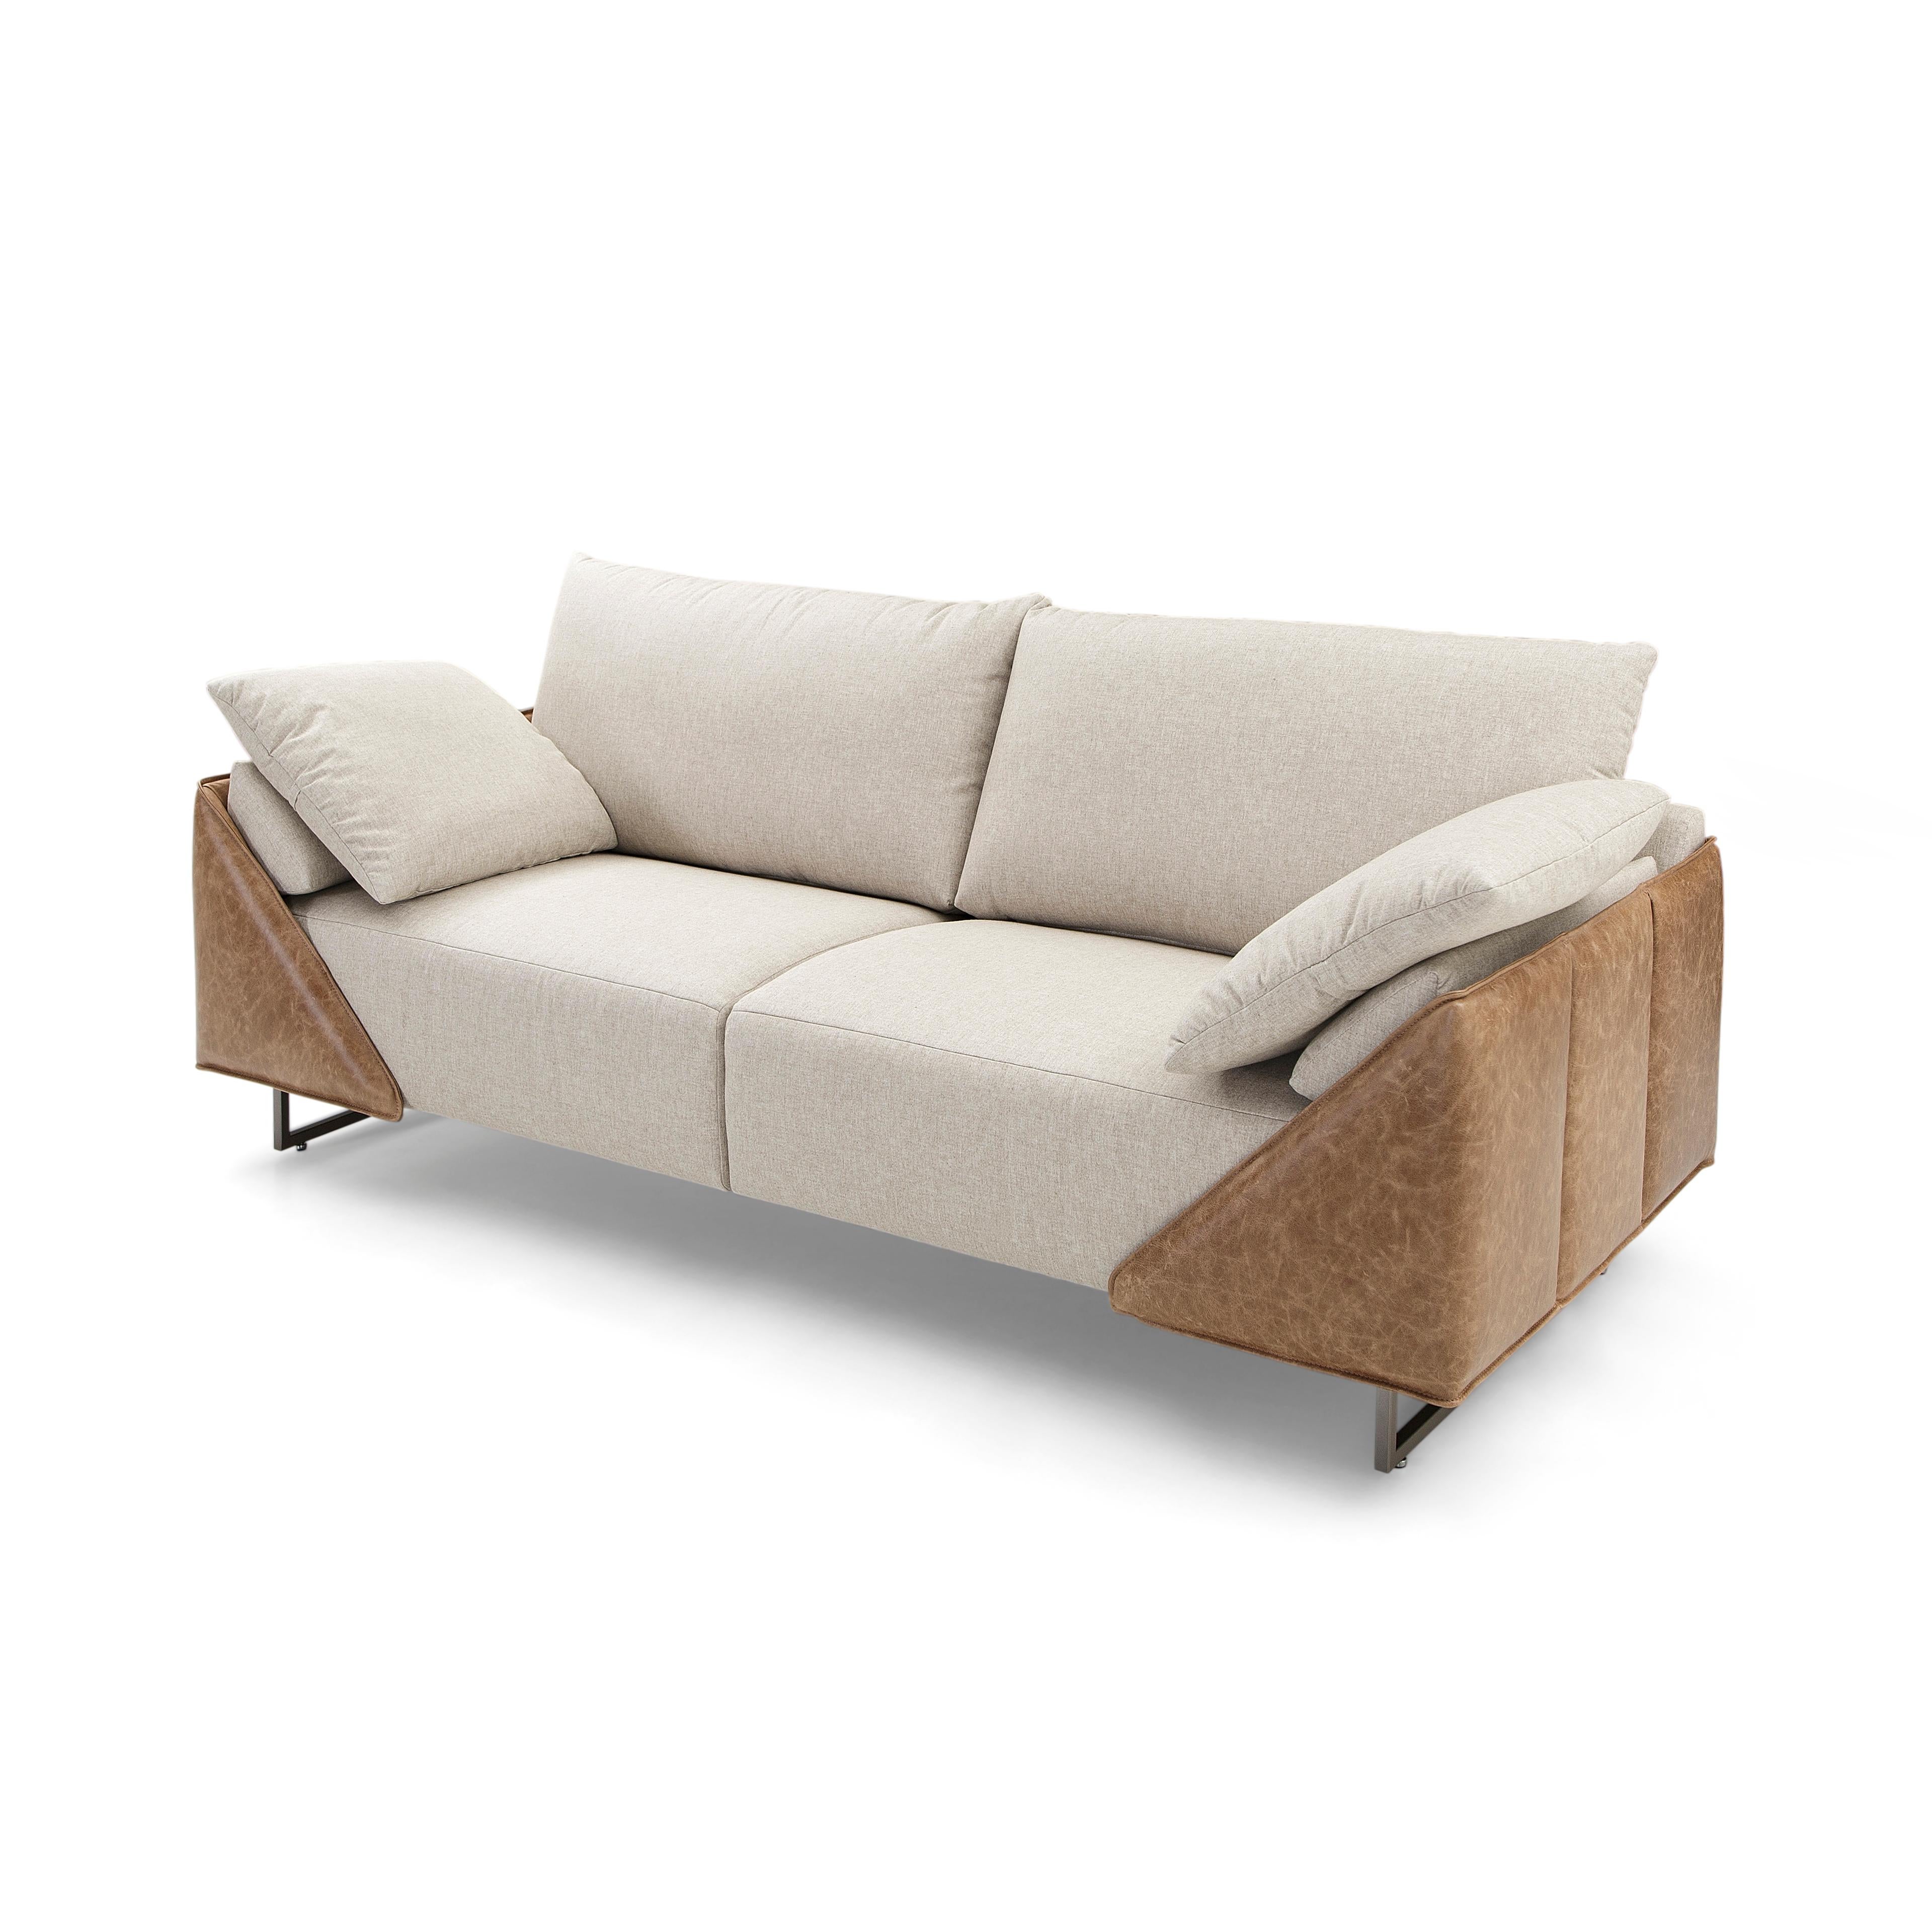 Upholstery Gondole Contemporary Sofa Upholstered in a Beige Fabric and Brown Leather 